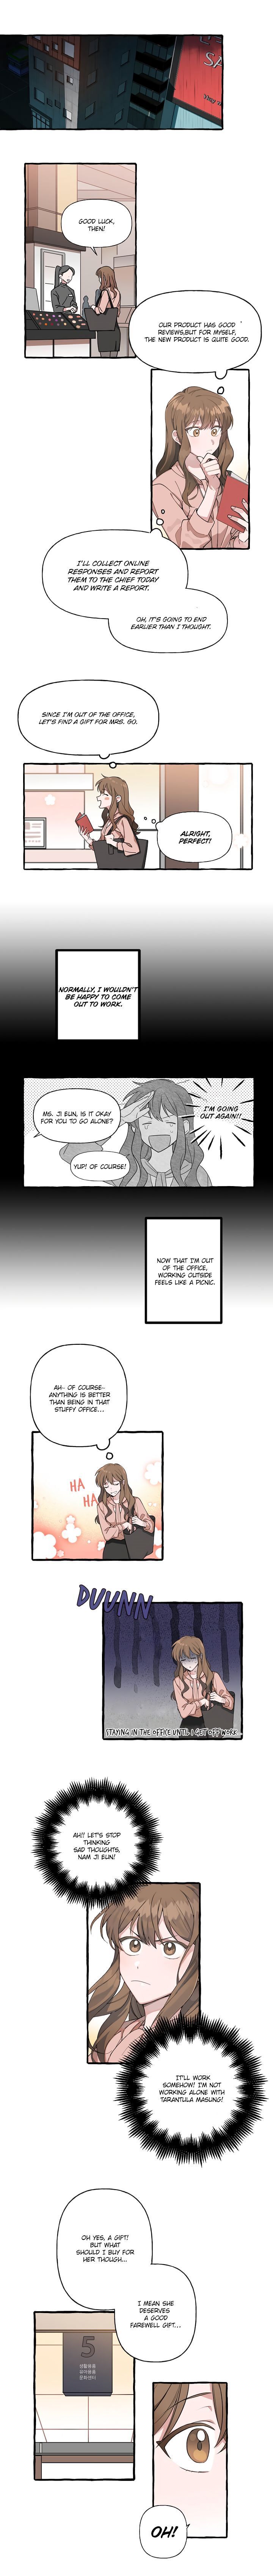 The Devious New Employee Chapter 003 page 2